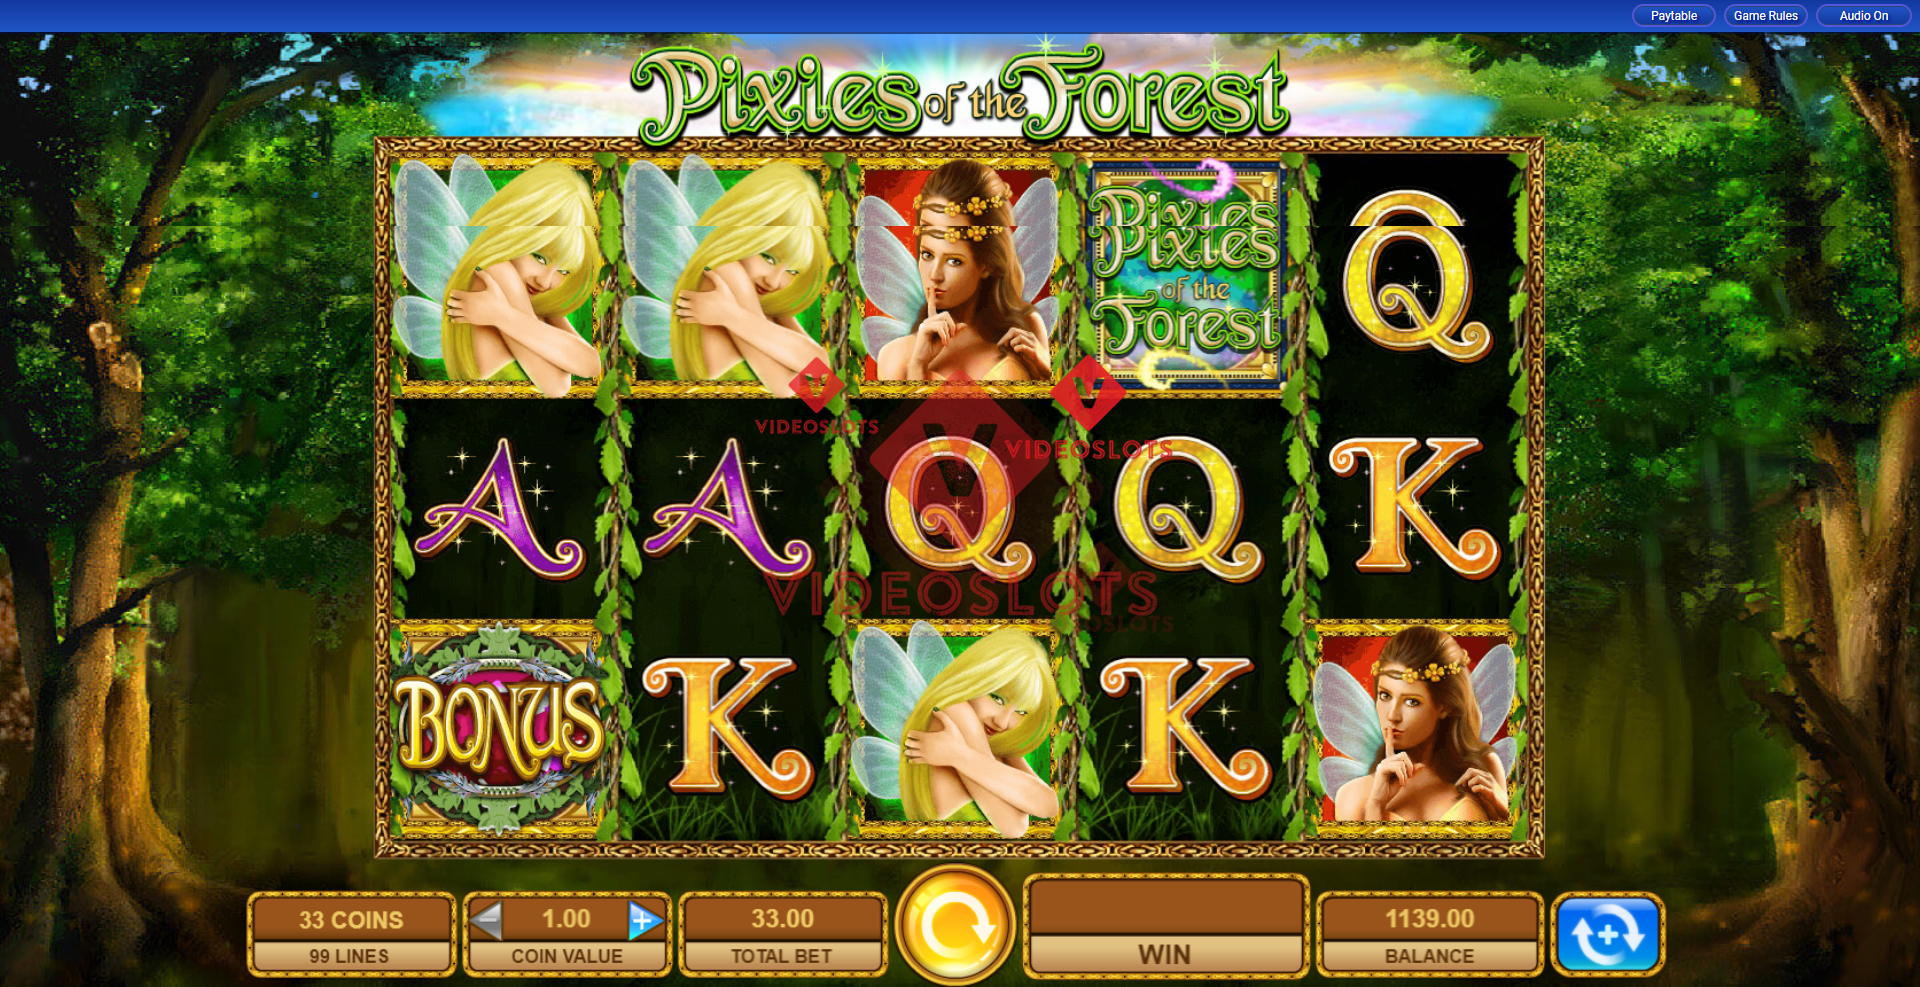 Base Game for Pixies of the Forest slot from IGT